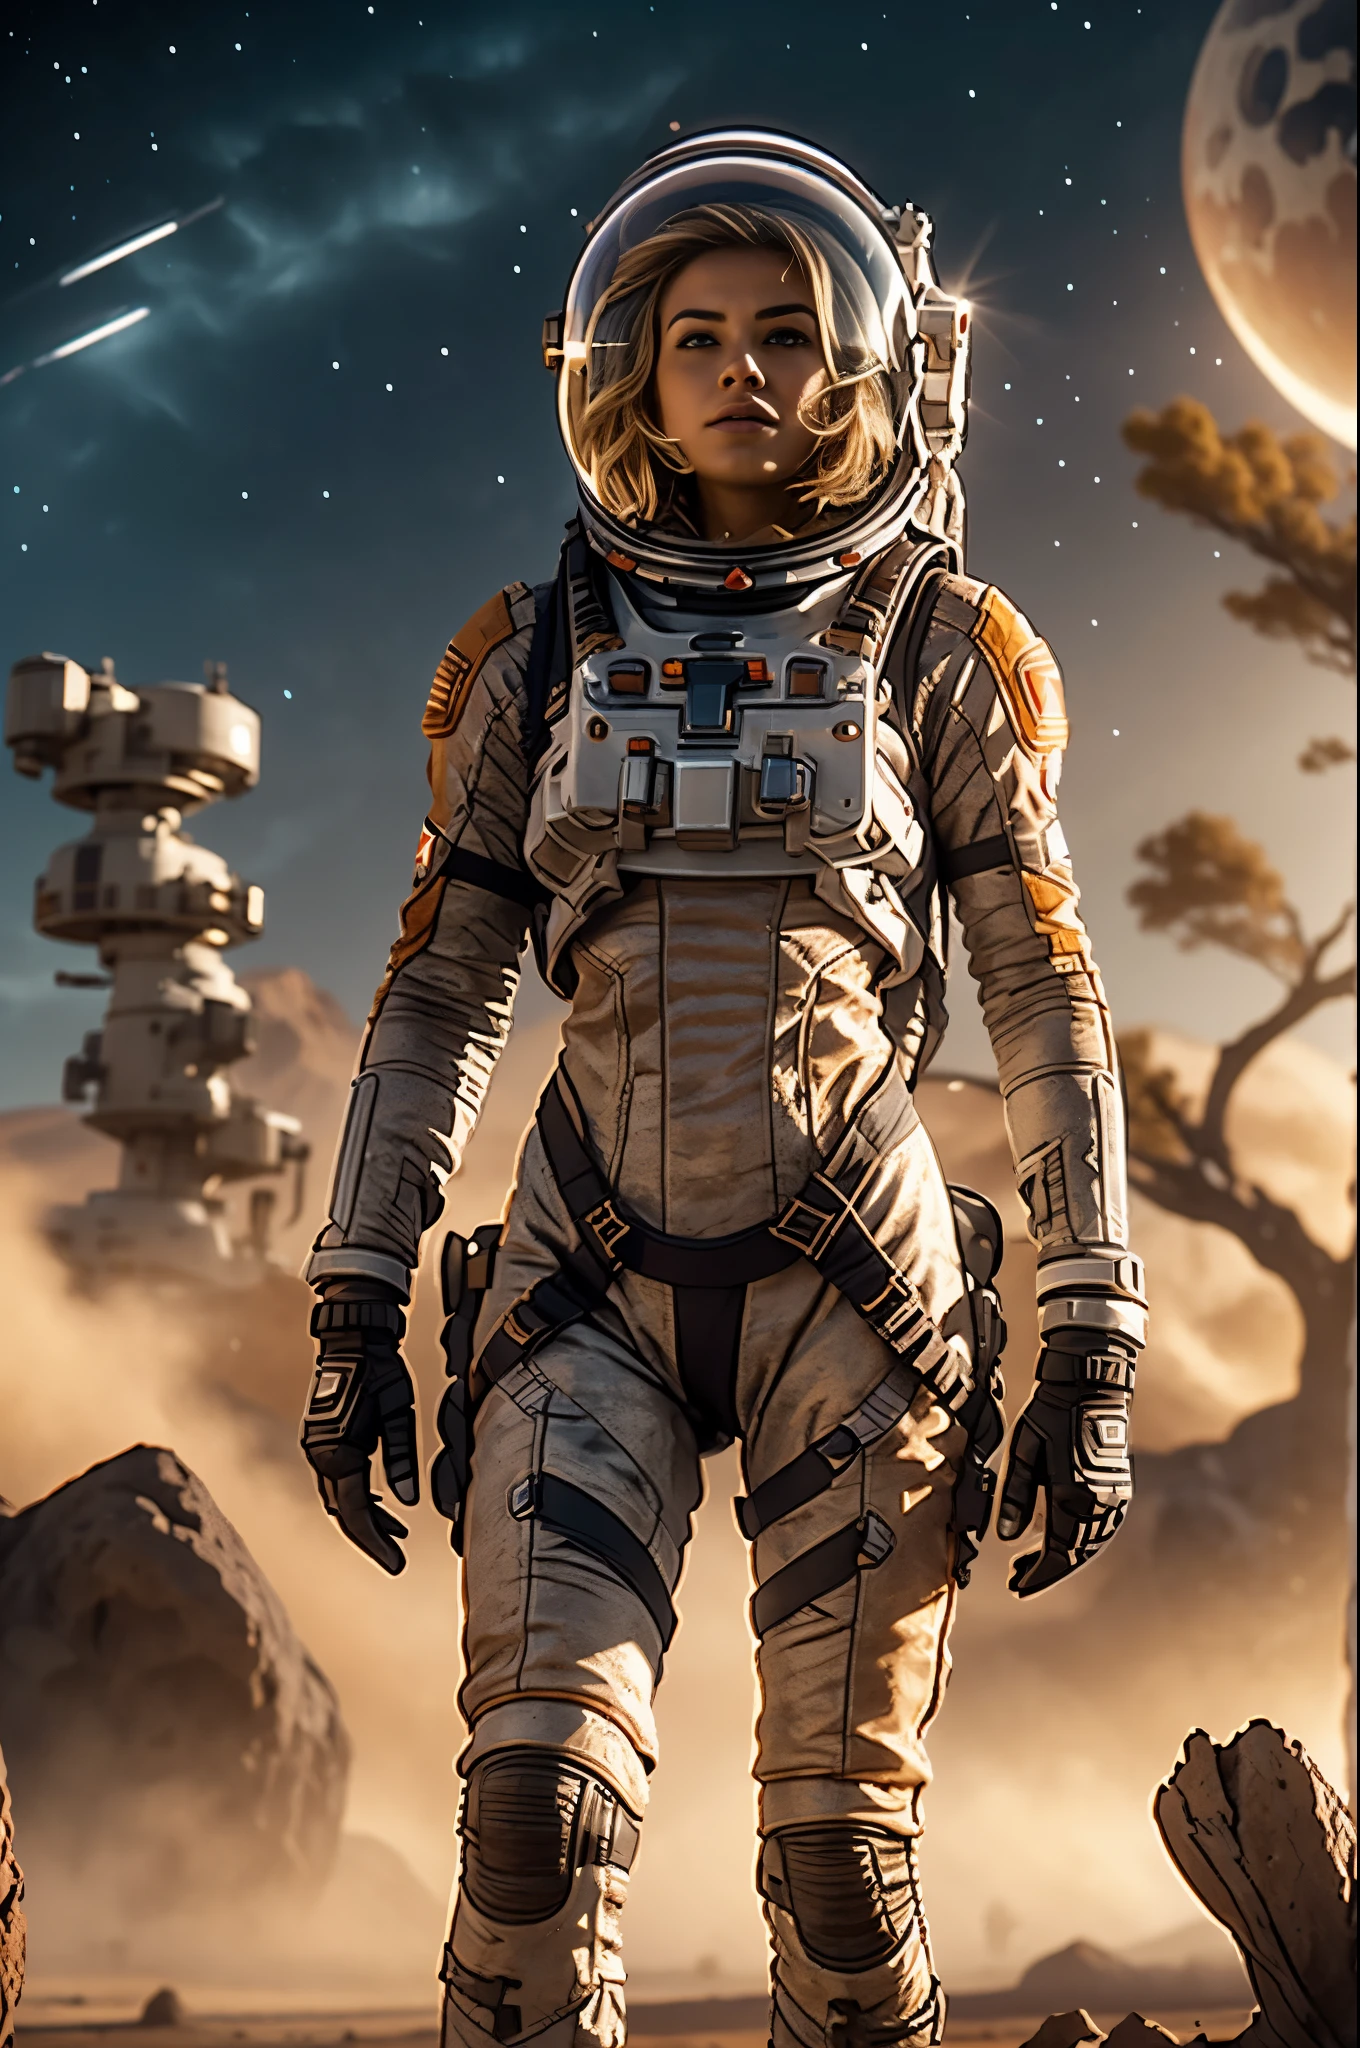 Masterpiece, forbiden planet landscape, swampland, solitary female astronaut, a beautiful 25 years old european blonde woman, radio dish antenna, Electric Purple, utility belt, Metallic Gray Zinc, sci-fi, ultra high res.photorealistic, 16k, UHD, HDR, the best quality, body-tight suit, intricate, the most fantastic details, cinematic composition, dramatic lighting, full body, celestial bodies in the sky, dead trees, dry bushes, realistic reflections, sunset,  to scale, , sad, dynamic posture,  a military compound in the background